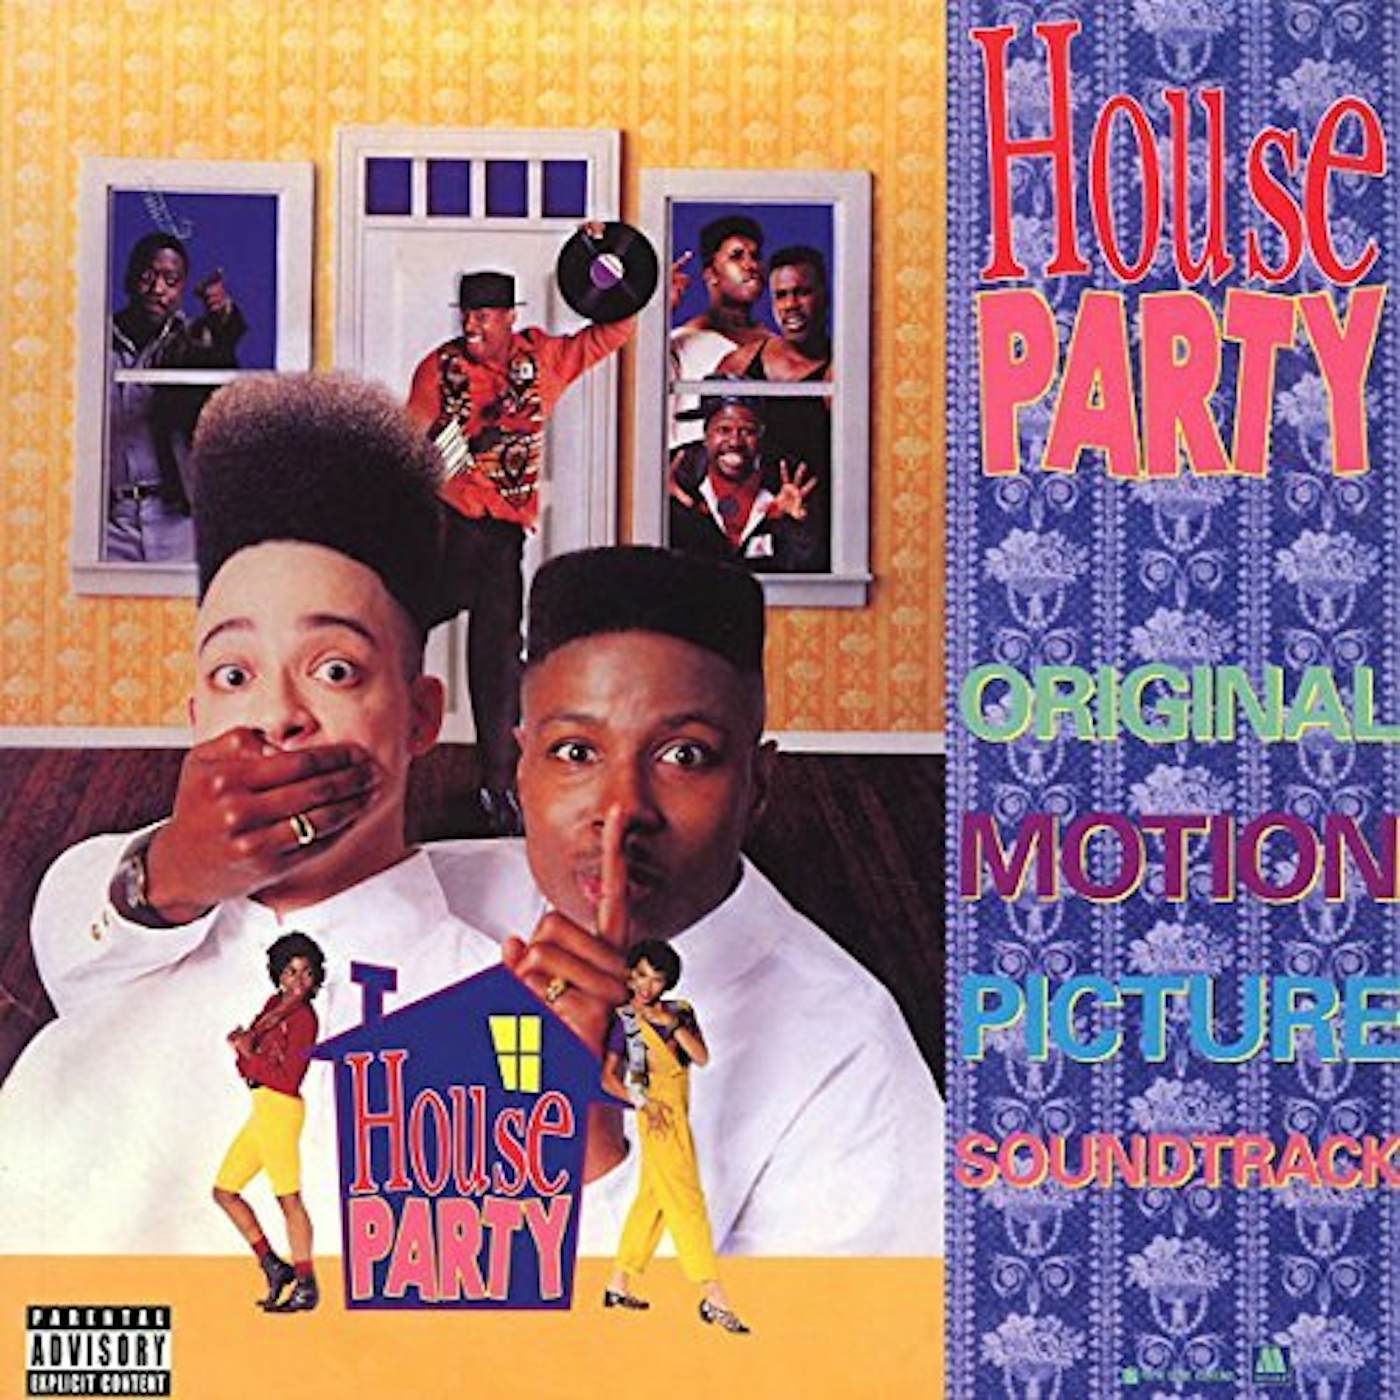 HOUSE PARTY / O.S.T. HOUSE PARTY / Original Soundtrack Vinyl Record